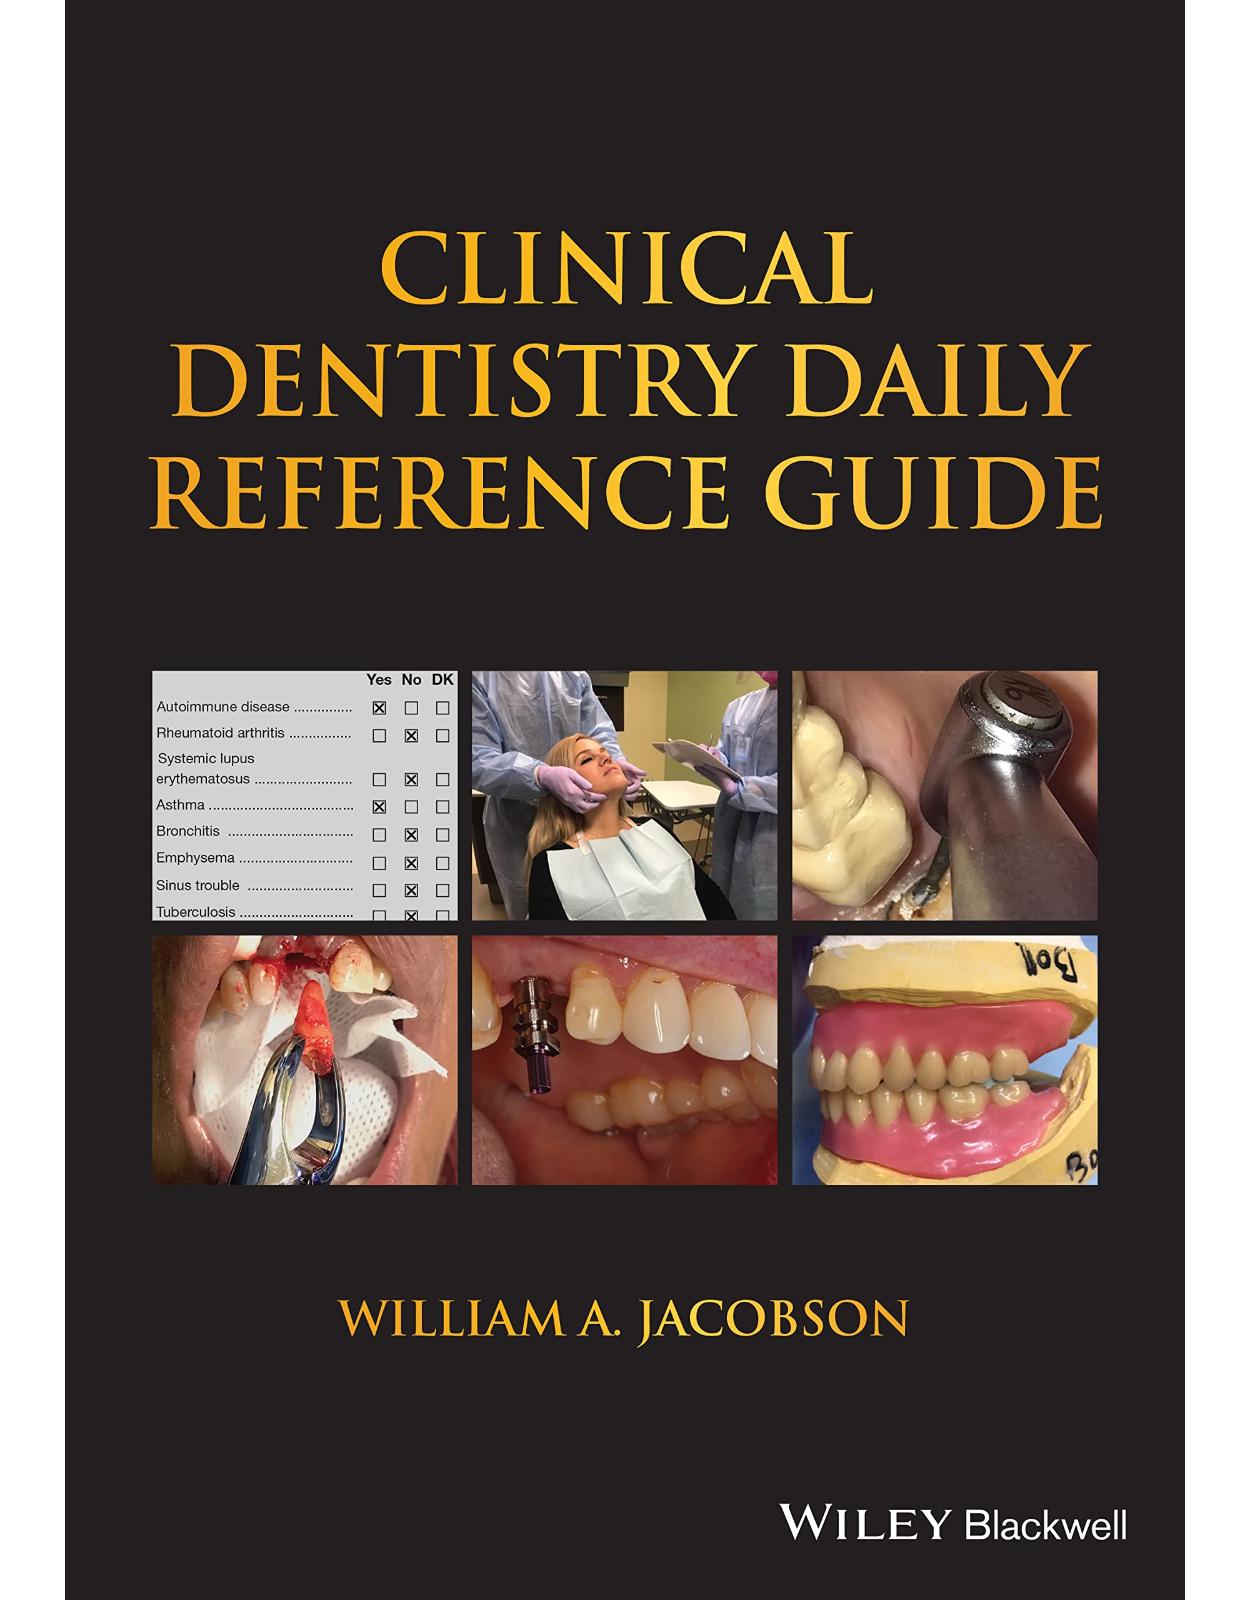 Clinical Dentistry Daily Reference Guide: A Chairside Reference to Clinical Dentistry